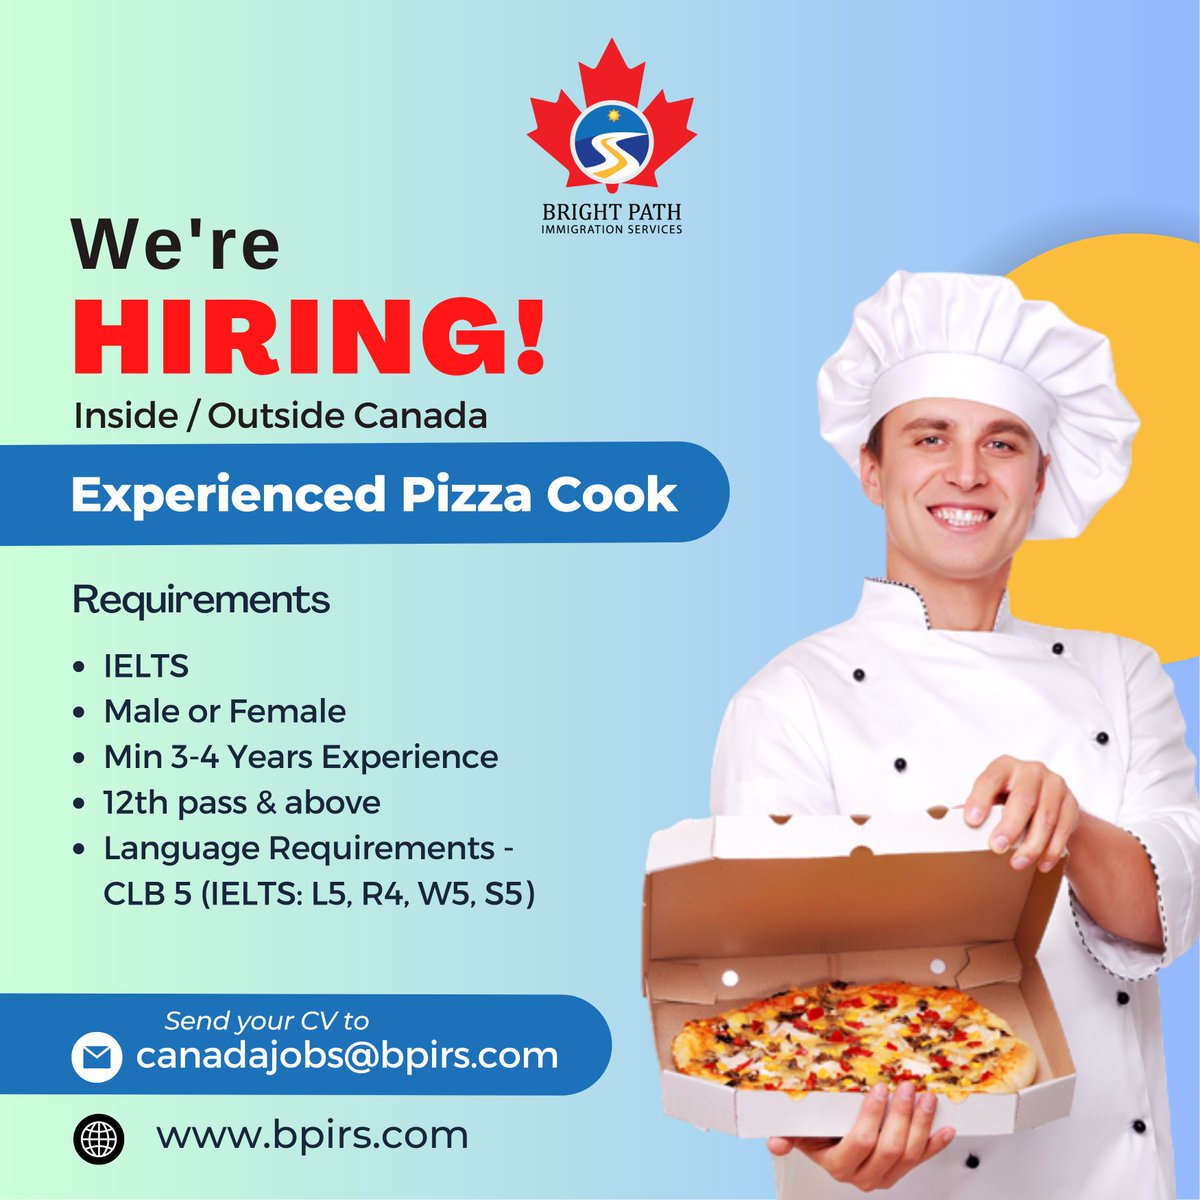 We're Hiring!
Inside / Outside Canada
Experienced Pizza Cook

🍁CONTACT🍁
📧: canadajobs@bpirs.com
🌐: bpirs.com

#bpirs #canadaimmigration #canada #workpermitcanada #permanentresident #hiringnow #cook #eperience #joboffering #pizzacook